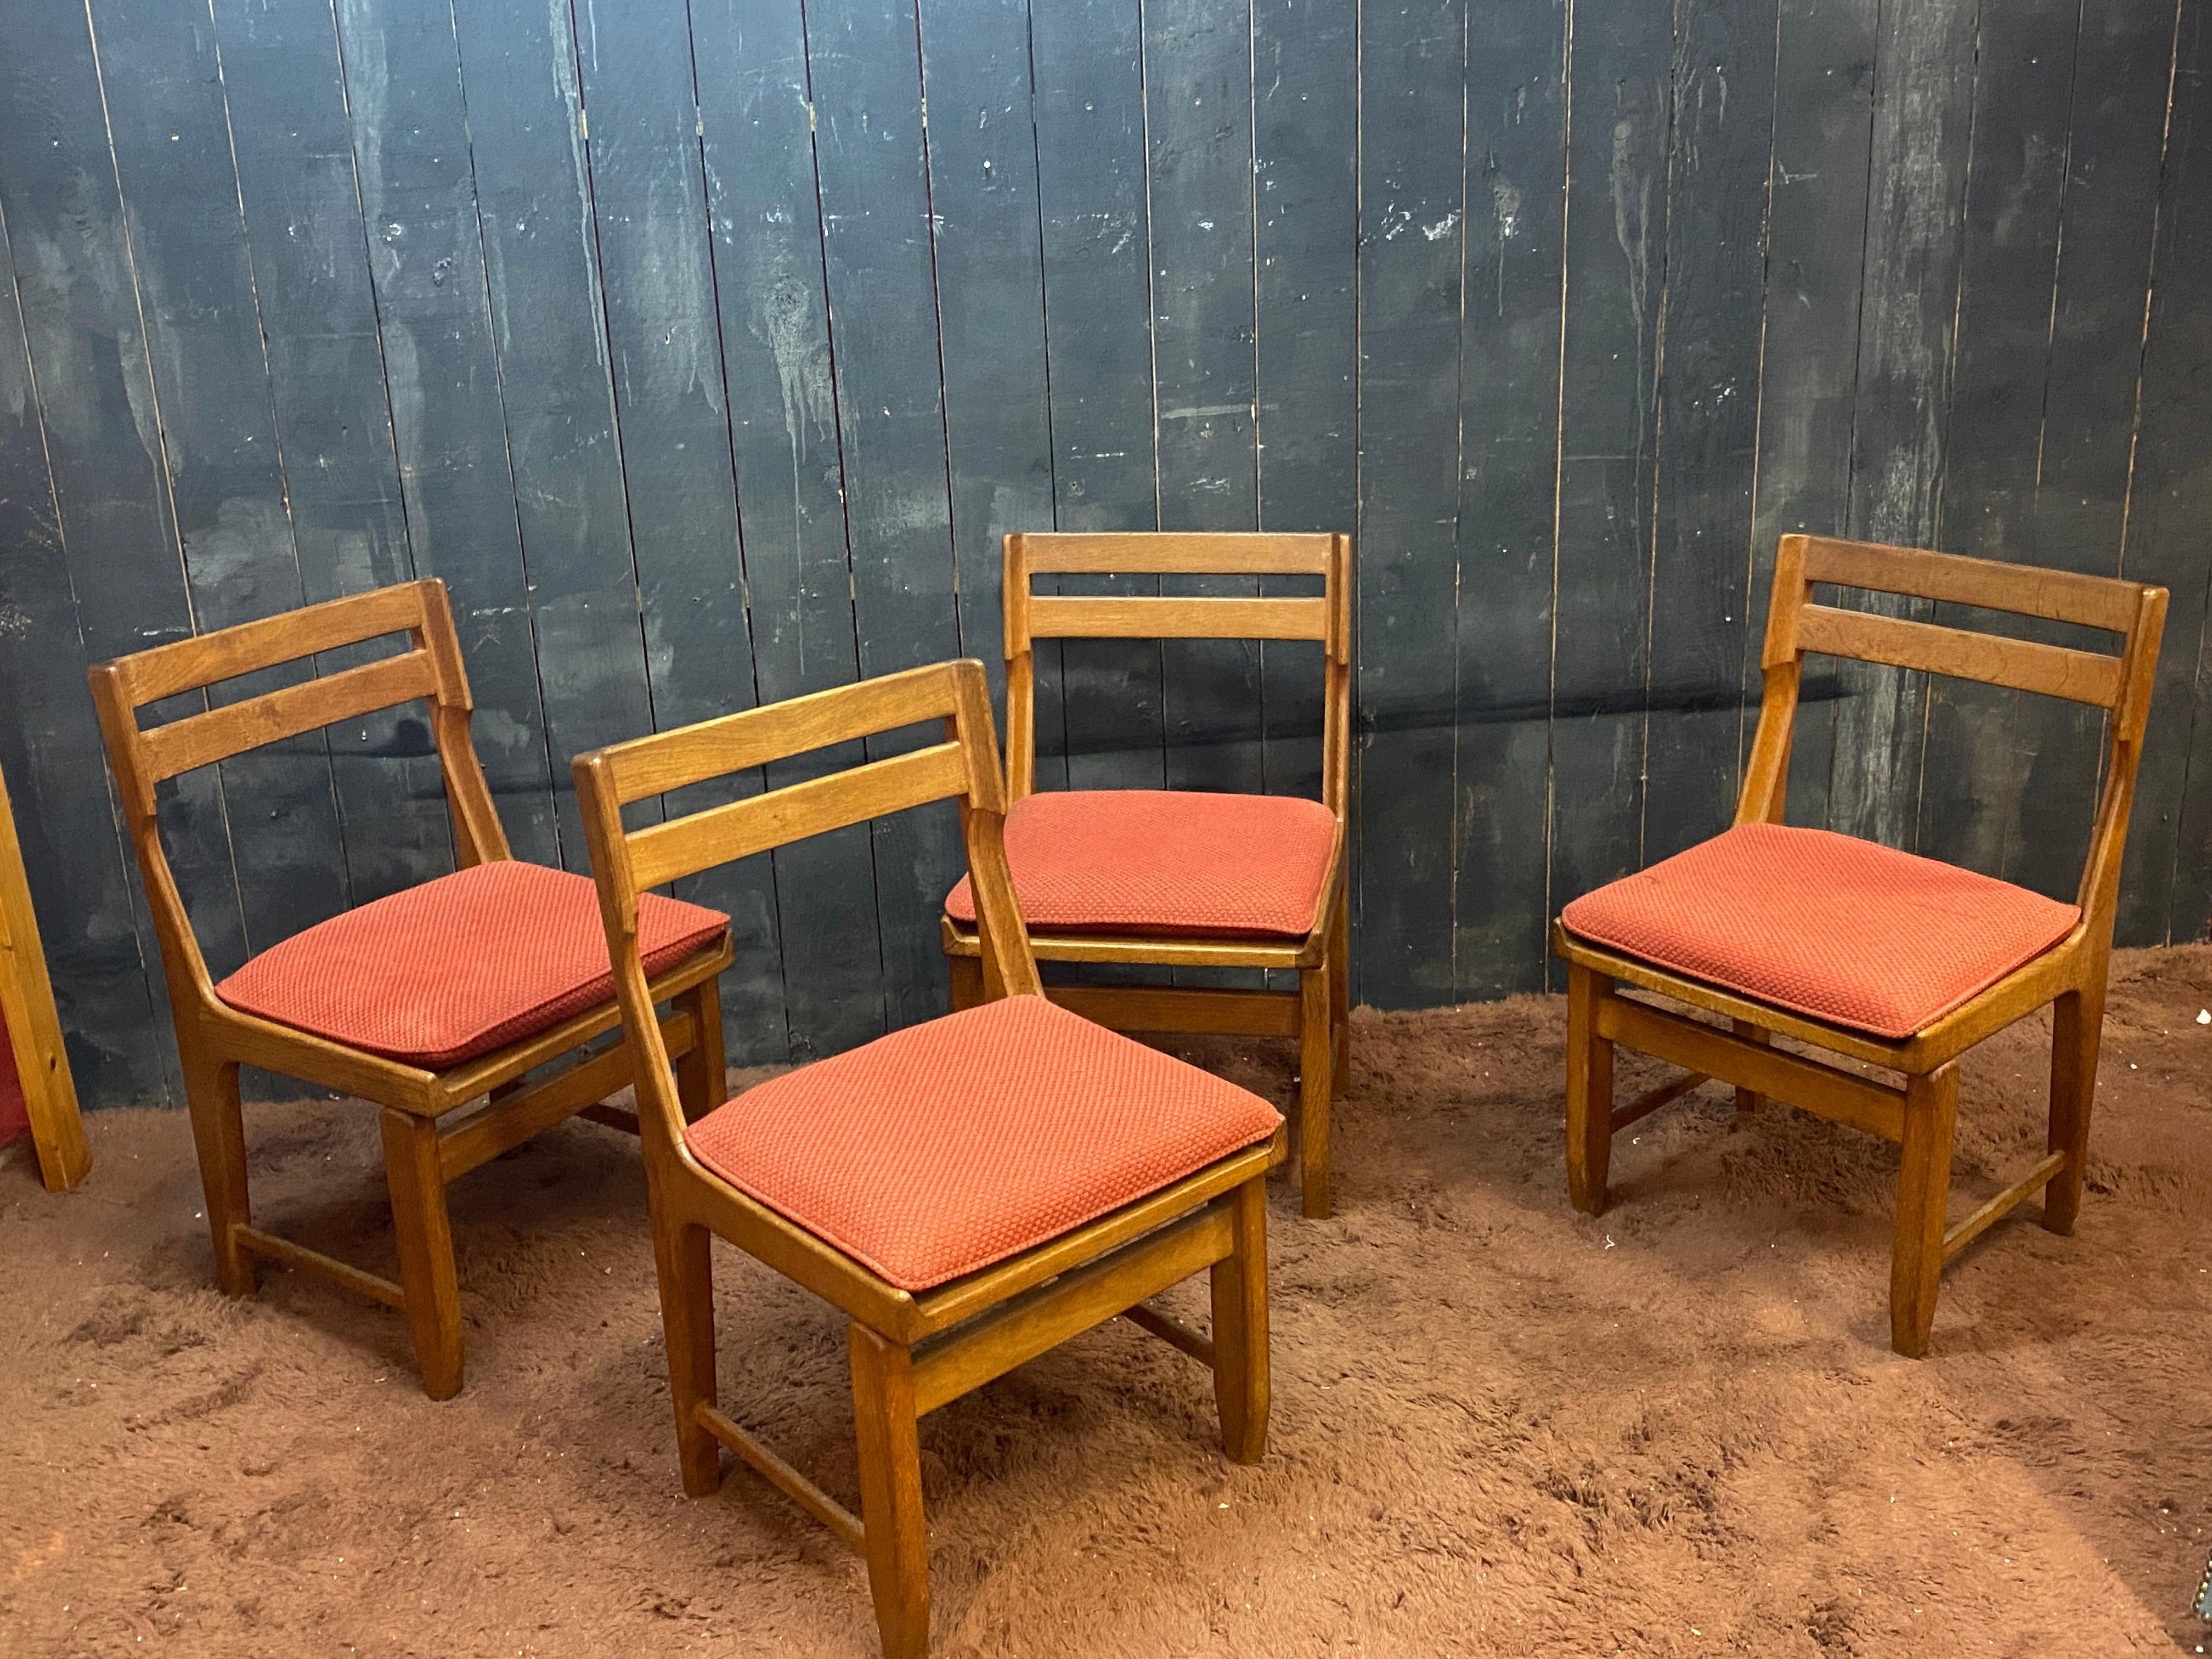 Guillerme et Chambron SET OF 4 chairs Edition Votre Maison, circa 1970.
Wood are in good condition.
faded fabric

possibility of having 12 chairs in total, patina and different fabric